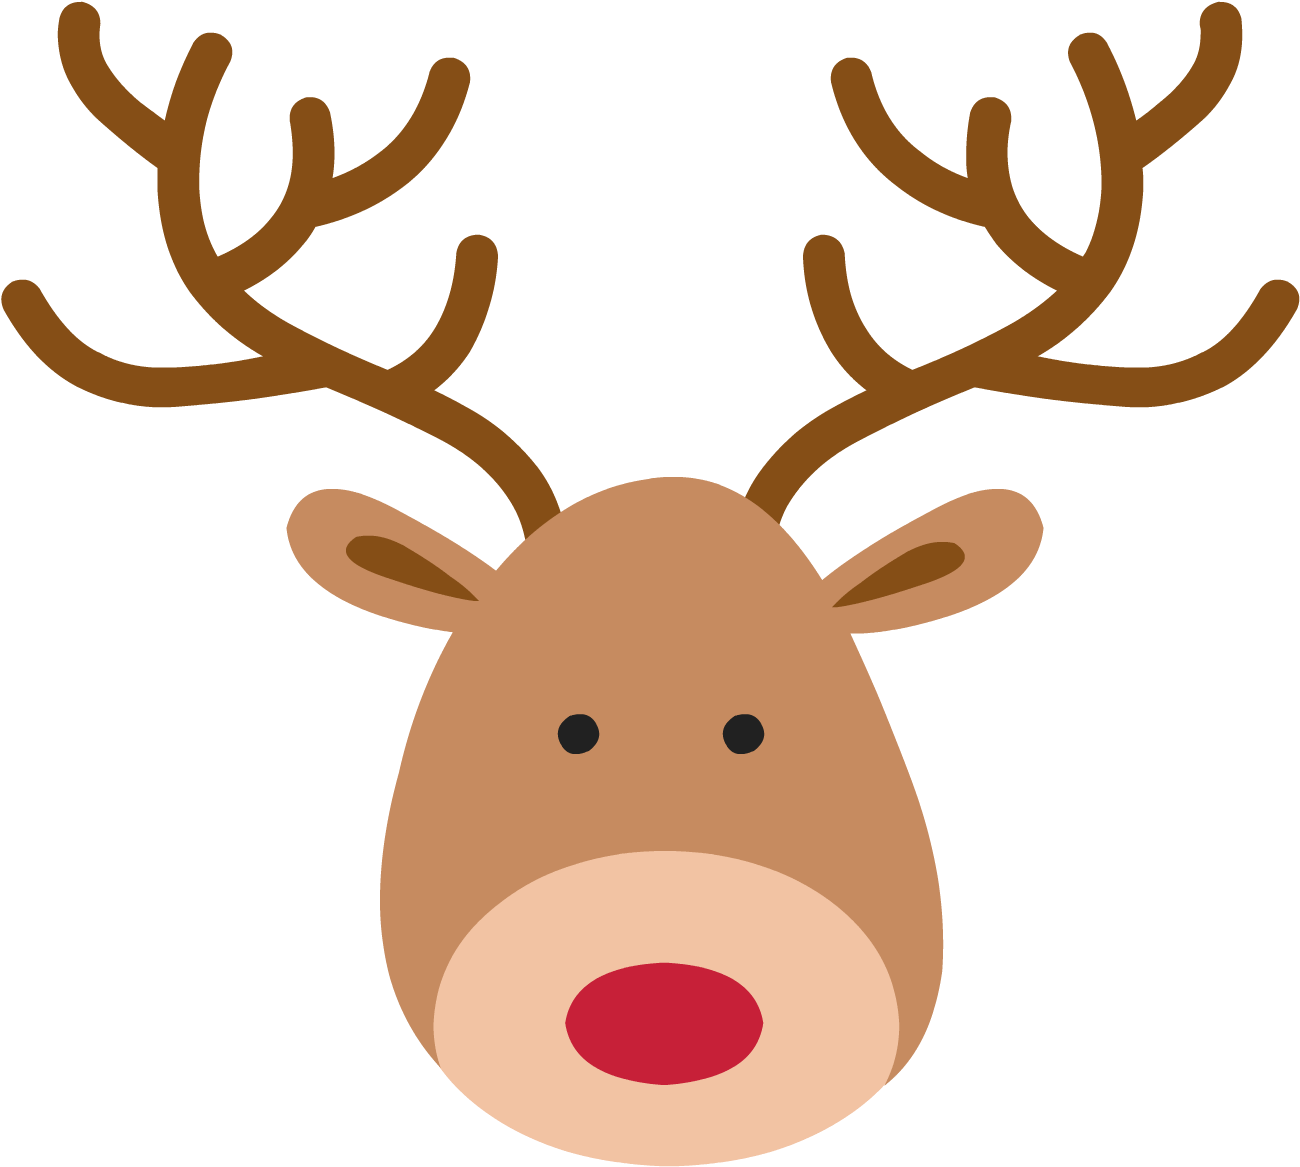 Christmas Tree Directory - Rudolph Wallpaper Iphone (1327x1201)